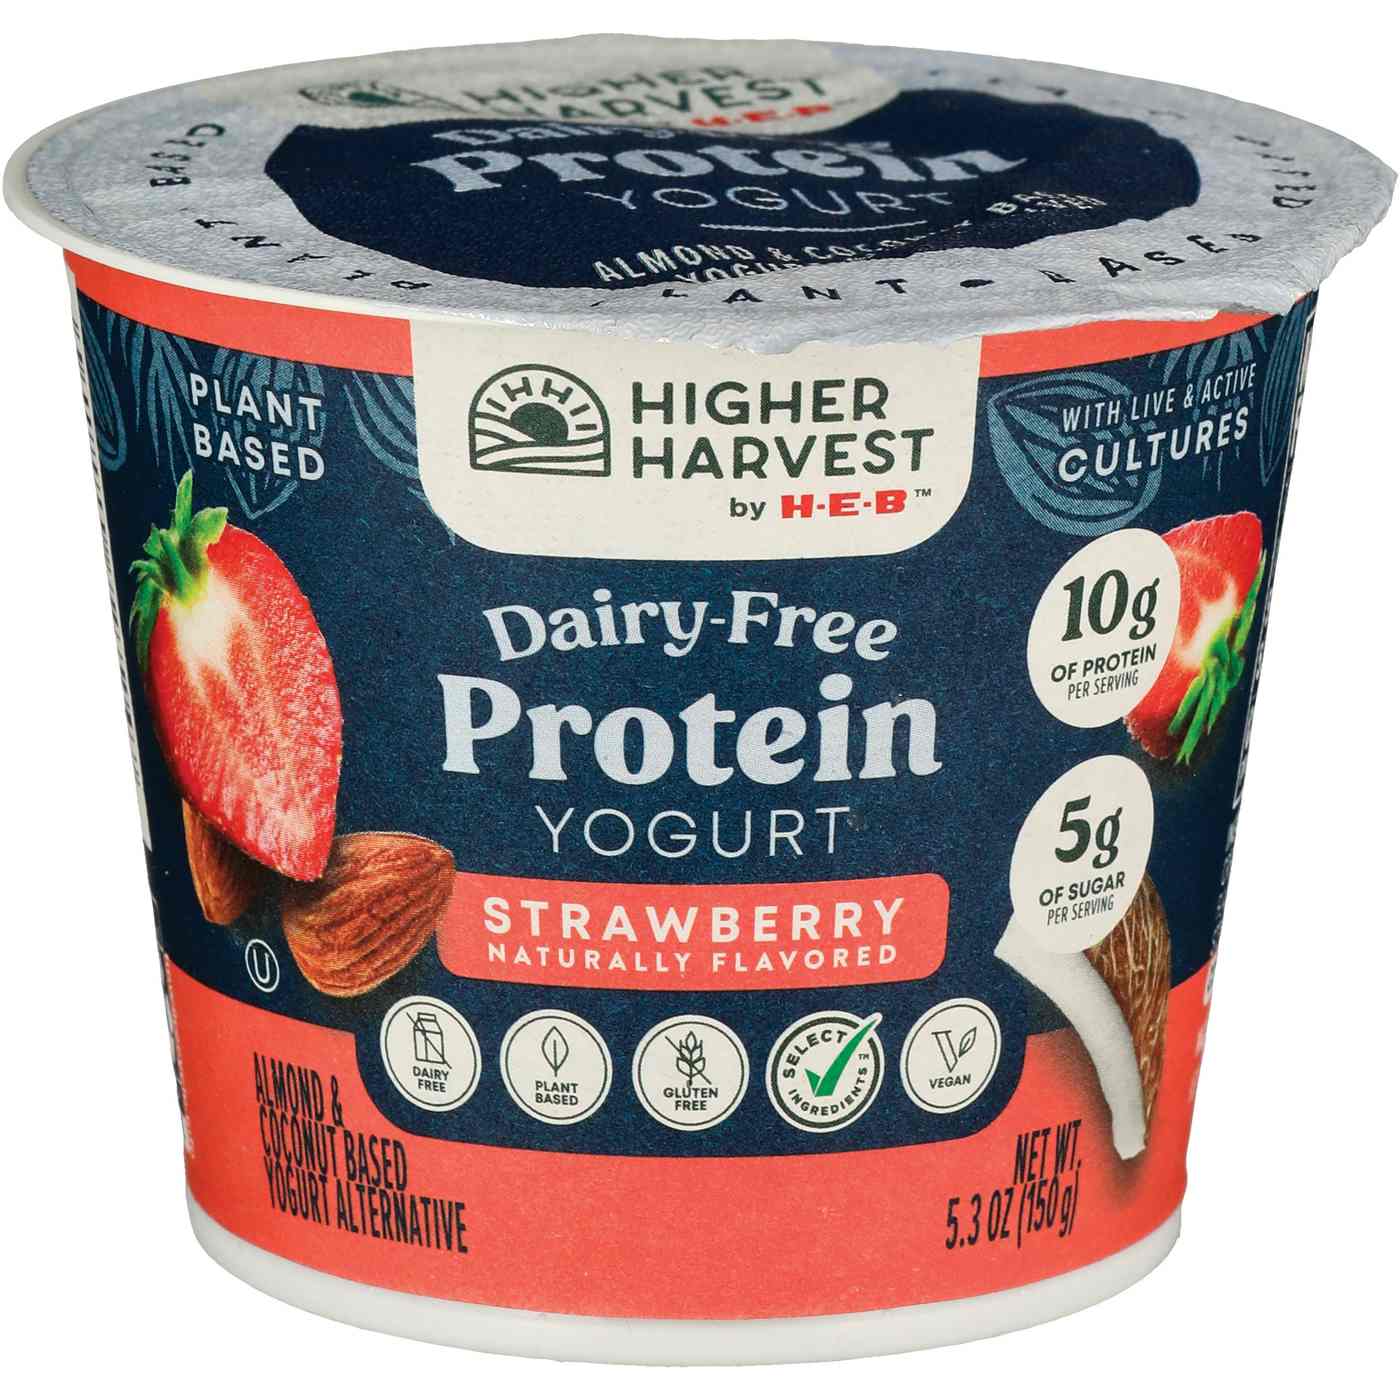 Higher Harvest by H-E-B Dairy-Free 10g Protein Yogurt – Strawberry; image 3 of 3